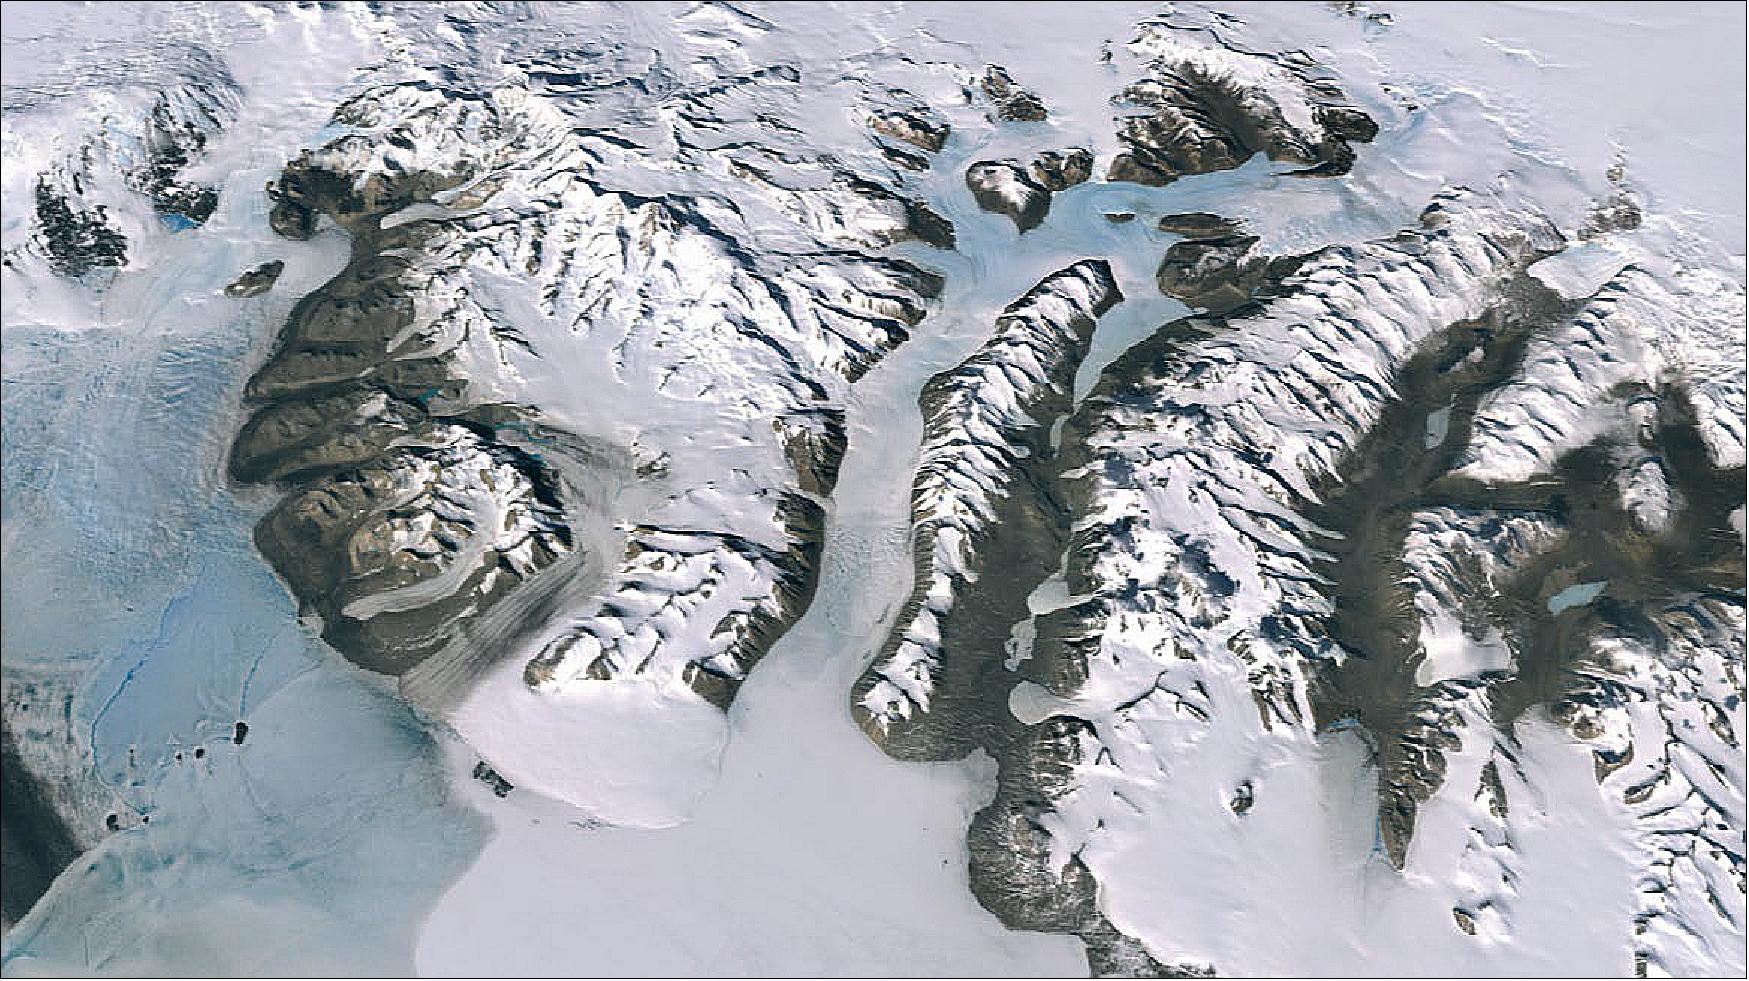 Figure 20: Over 1000 images from the LIMA dataset were used to generate this mosaic of the Ferrar Glacier at 15-m spatial resolution. At the time it was generated, this was the most detailed such image of Antarctica ever generated (image credit: NASA)